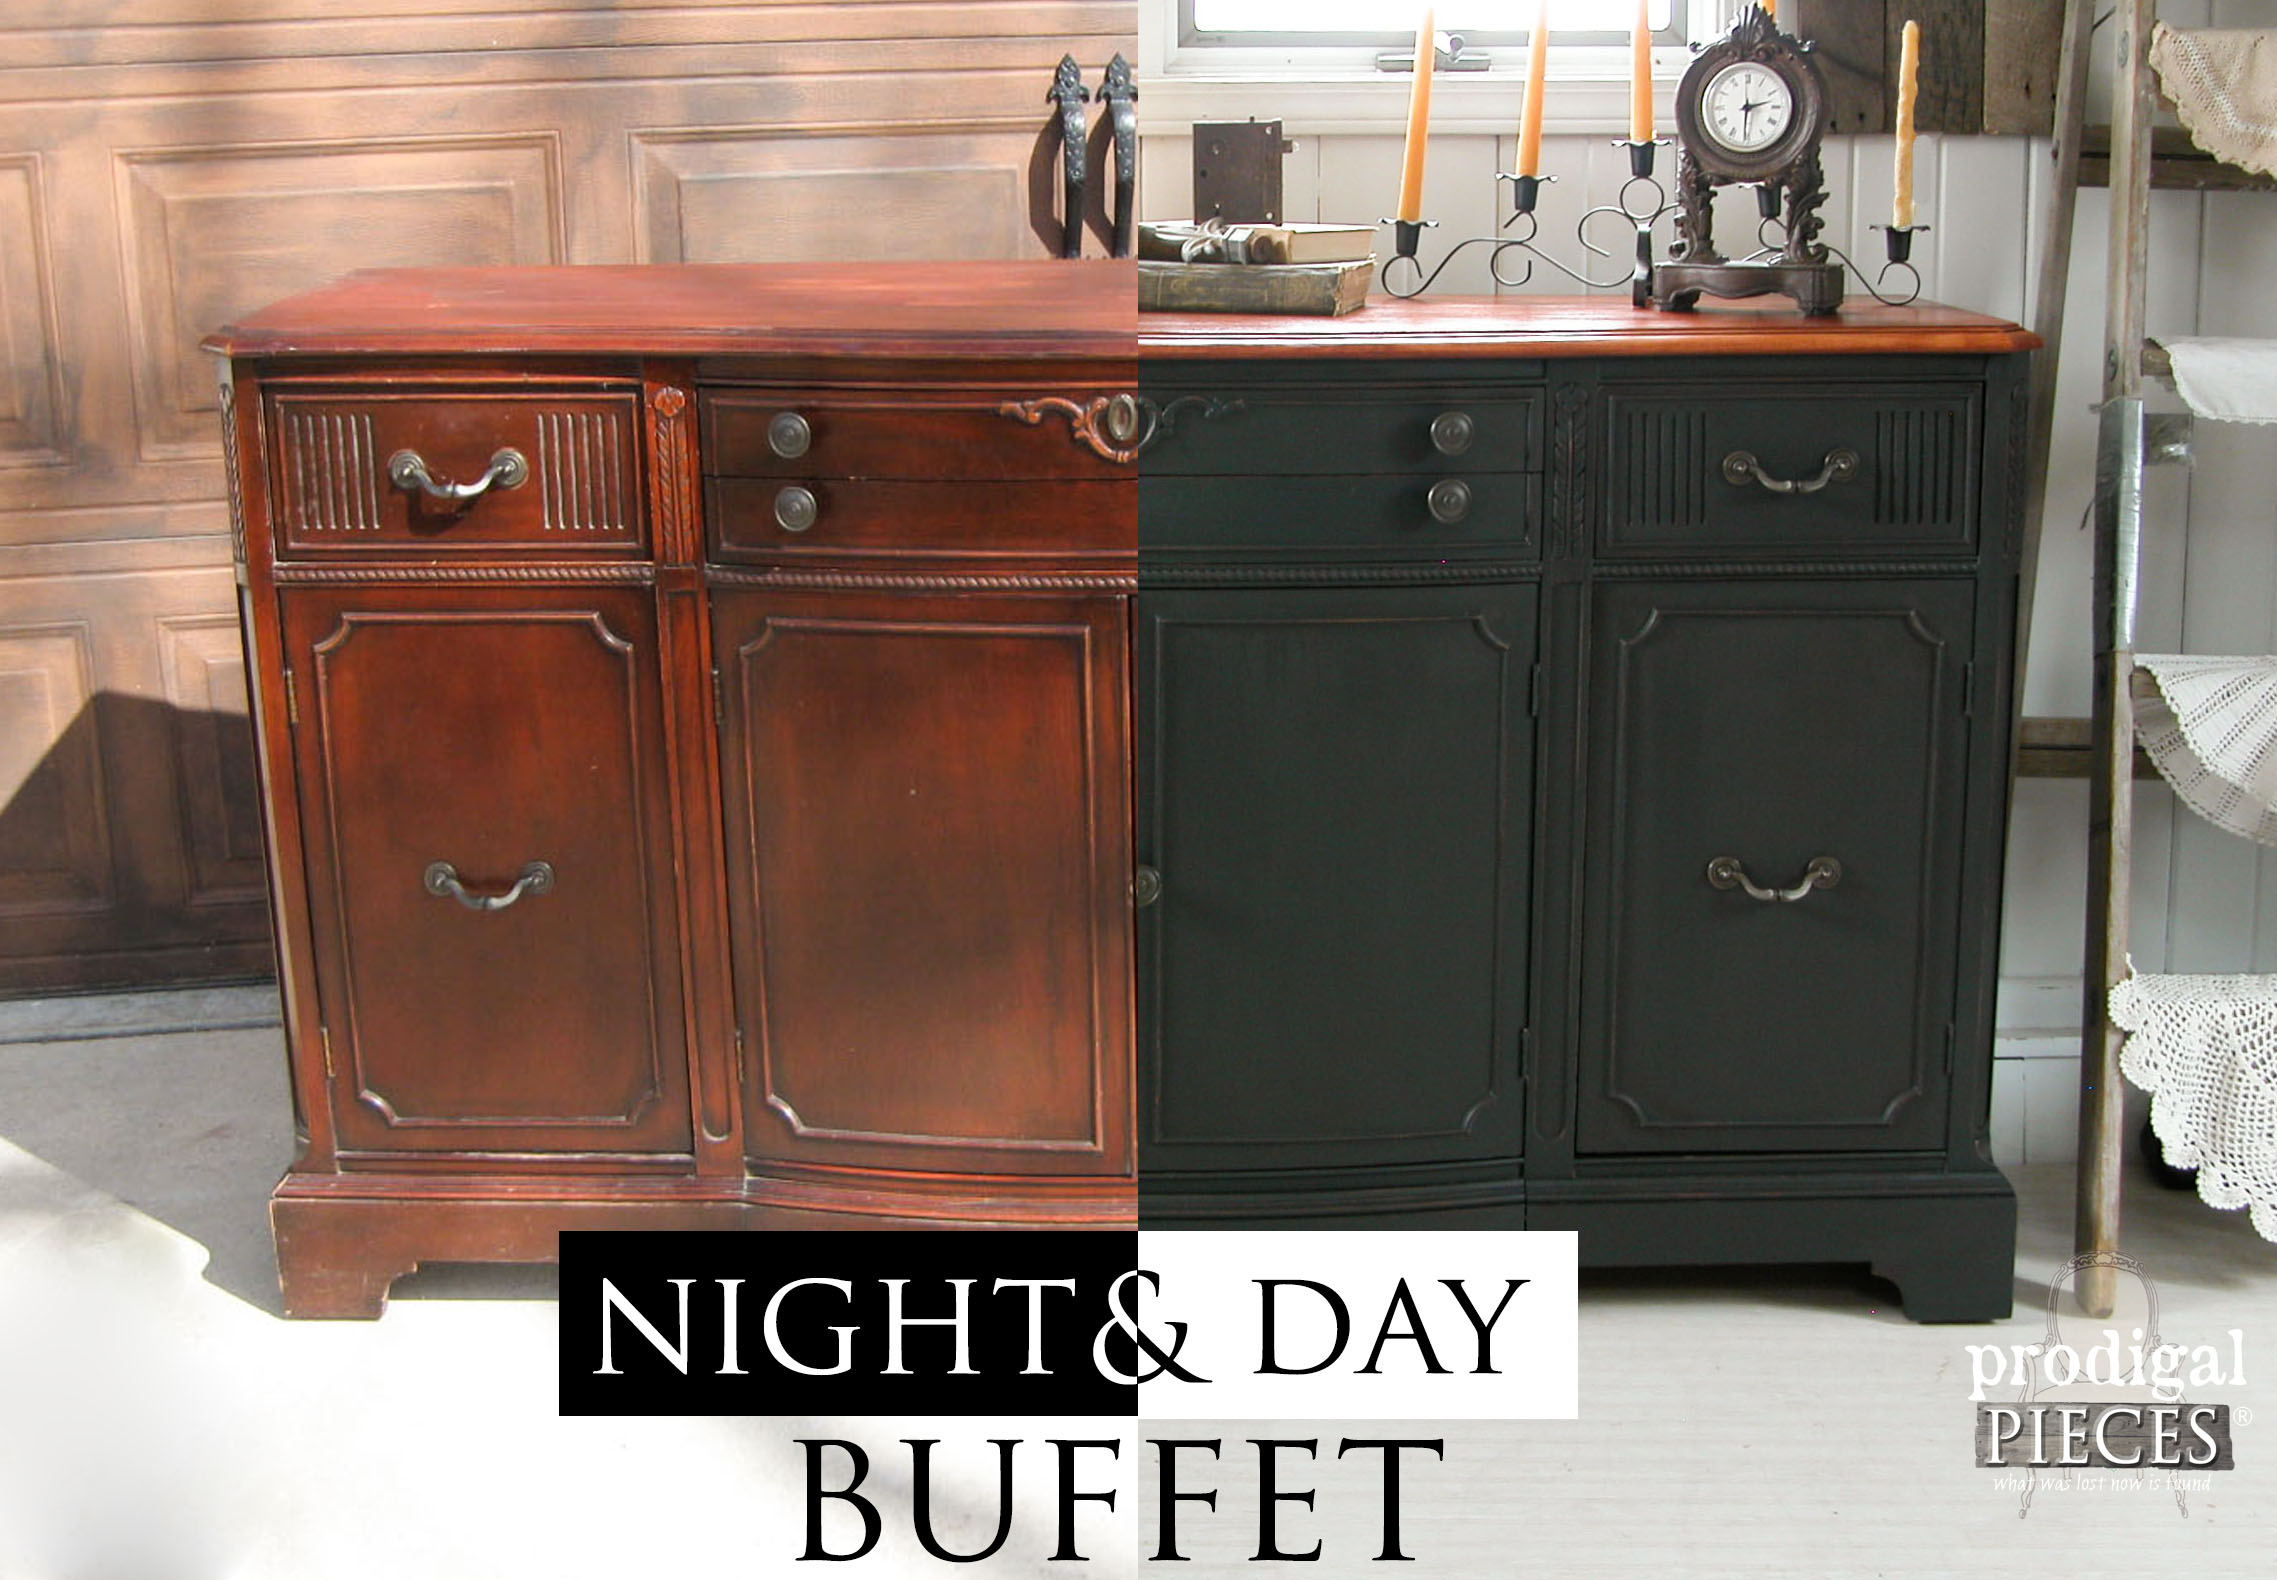 Vintage Buffet Gets Night and Day Makeover by Prodigal Pieces | prodigalpieces.com